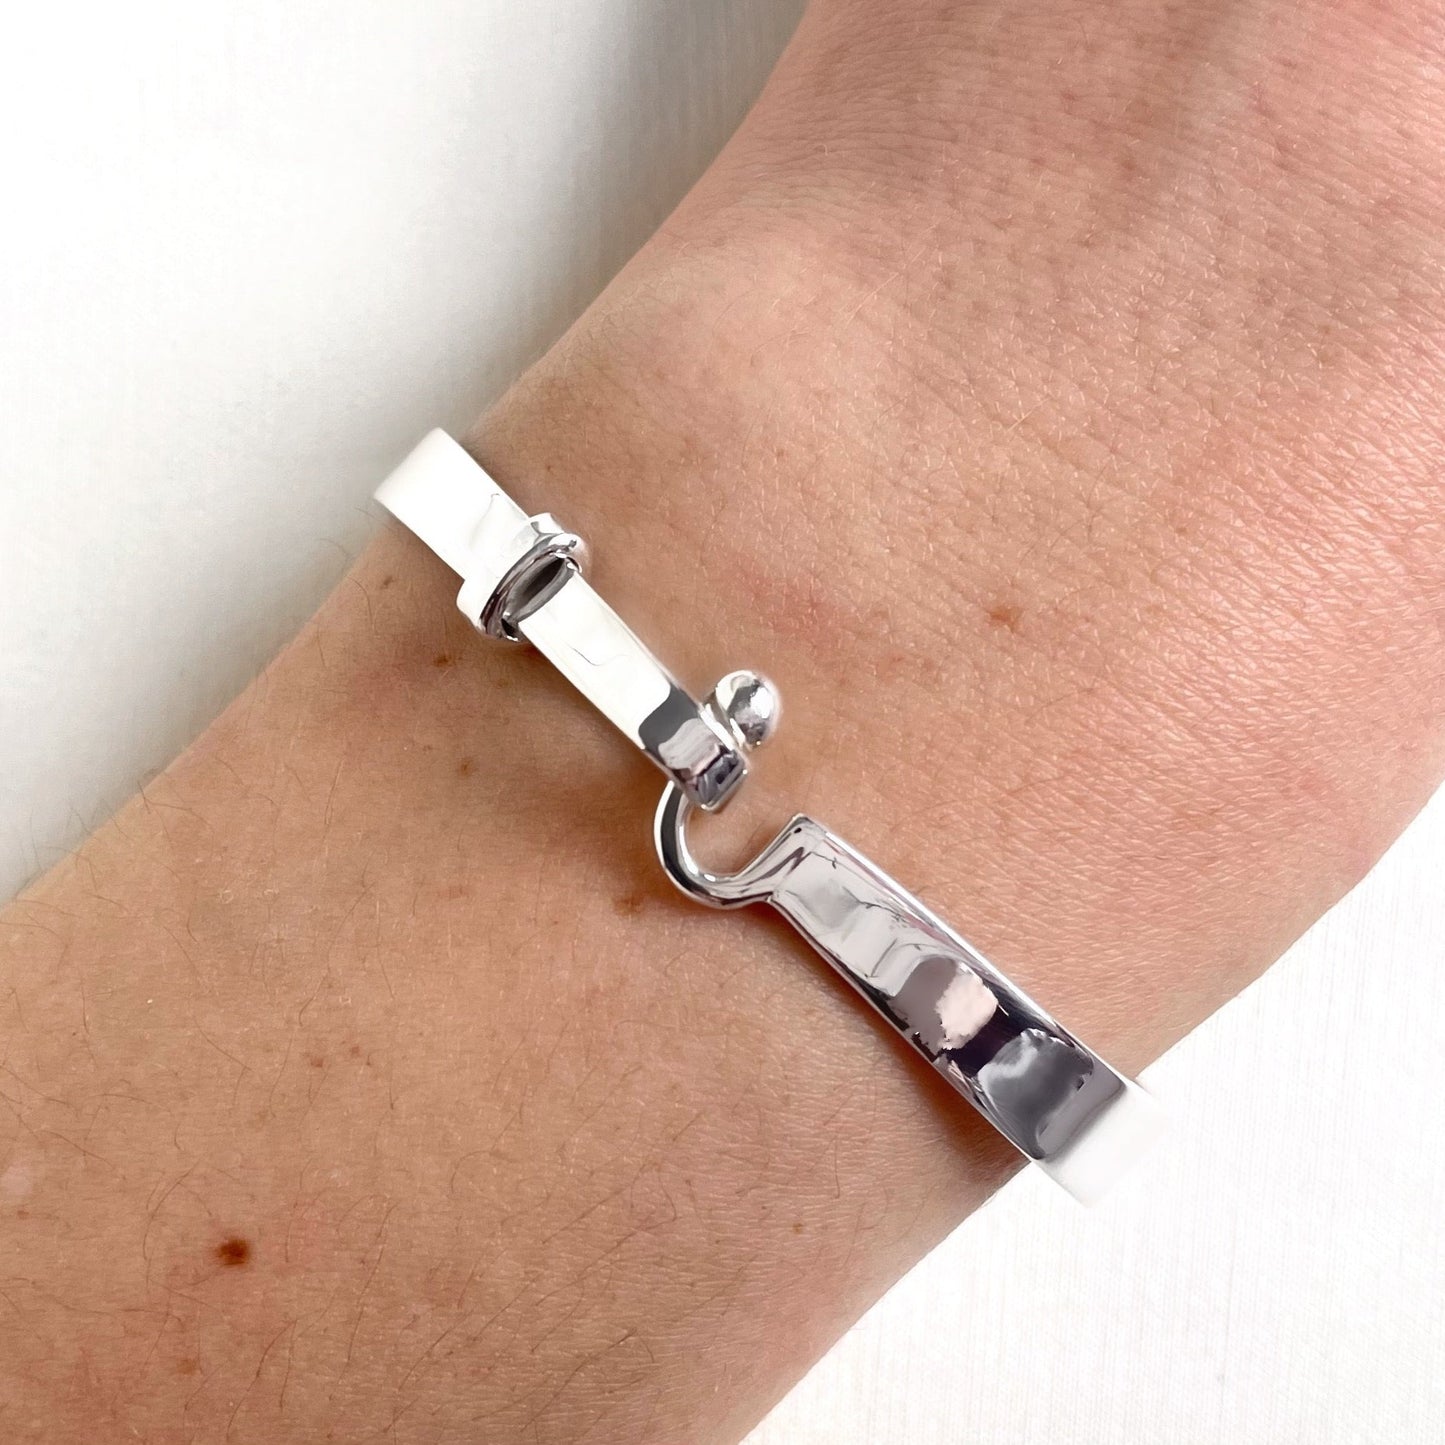 C Hook with Ball Silver Bangle Bracelet for Small Wrist